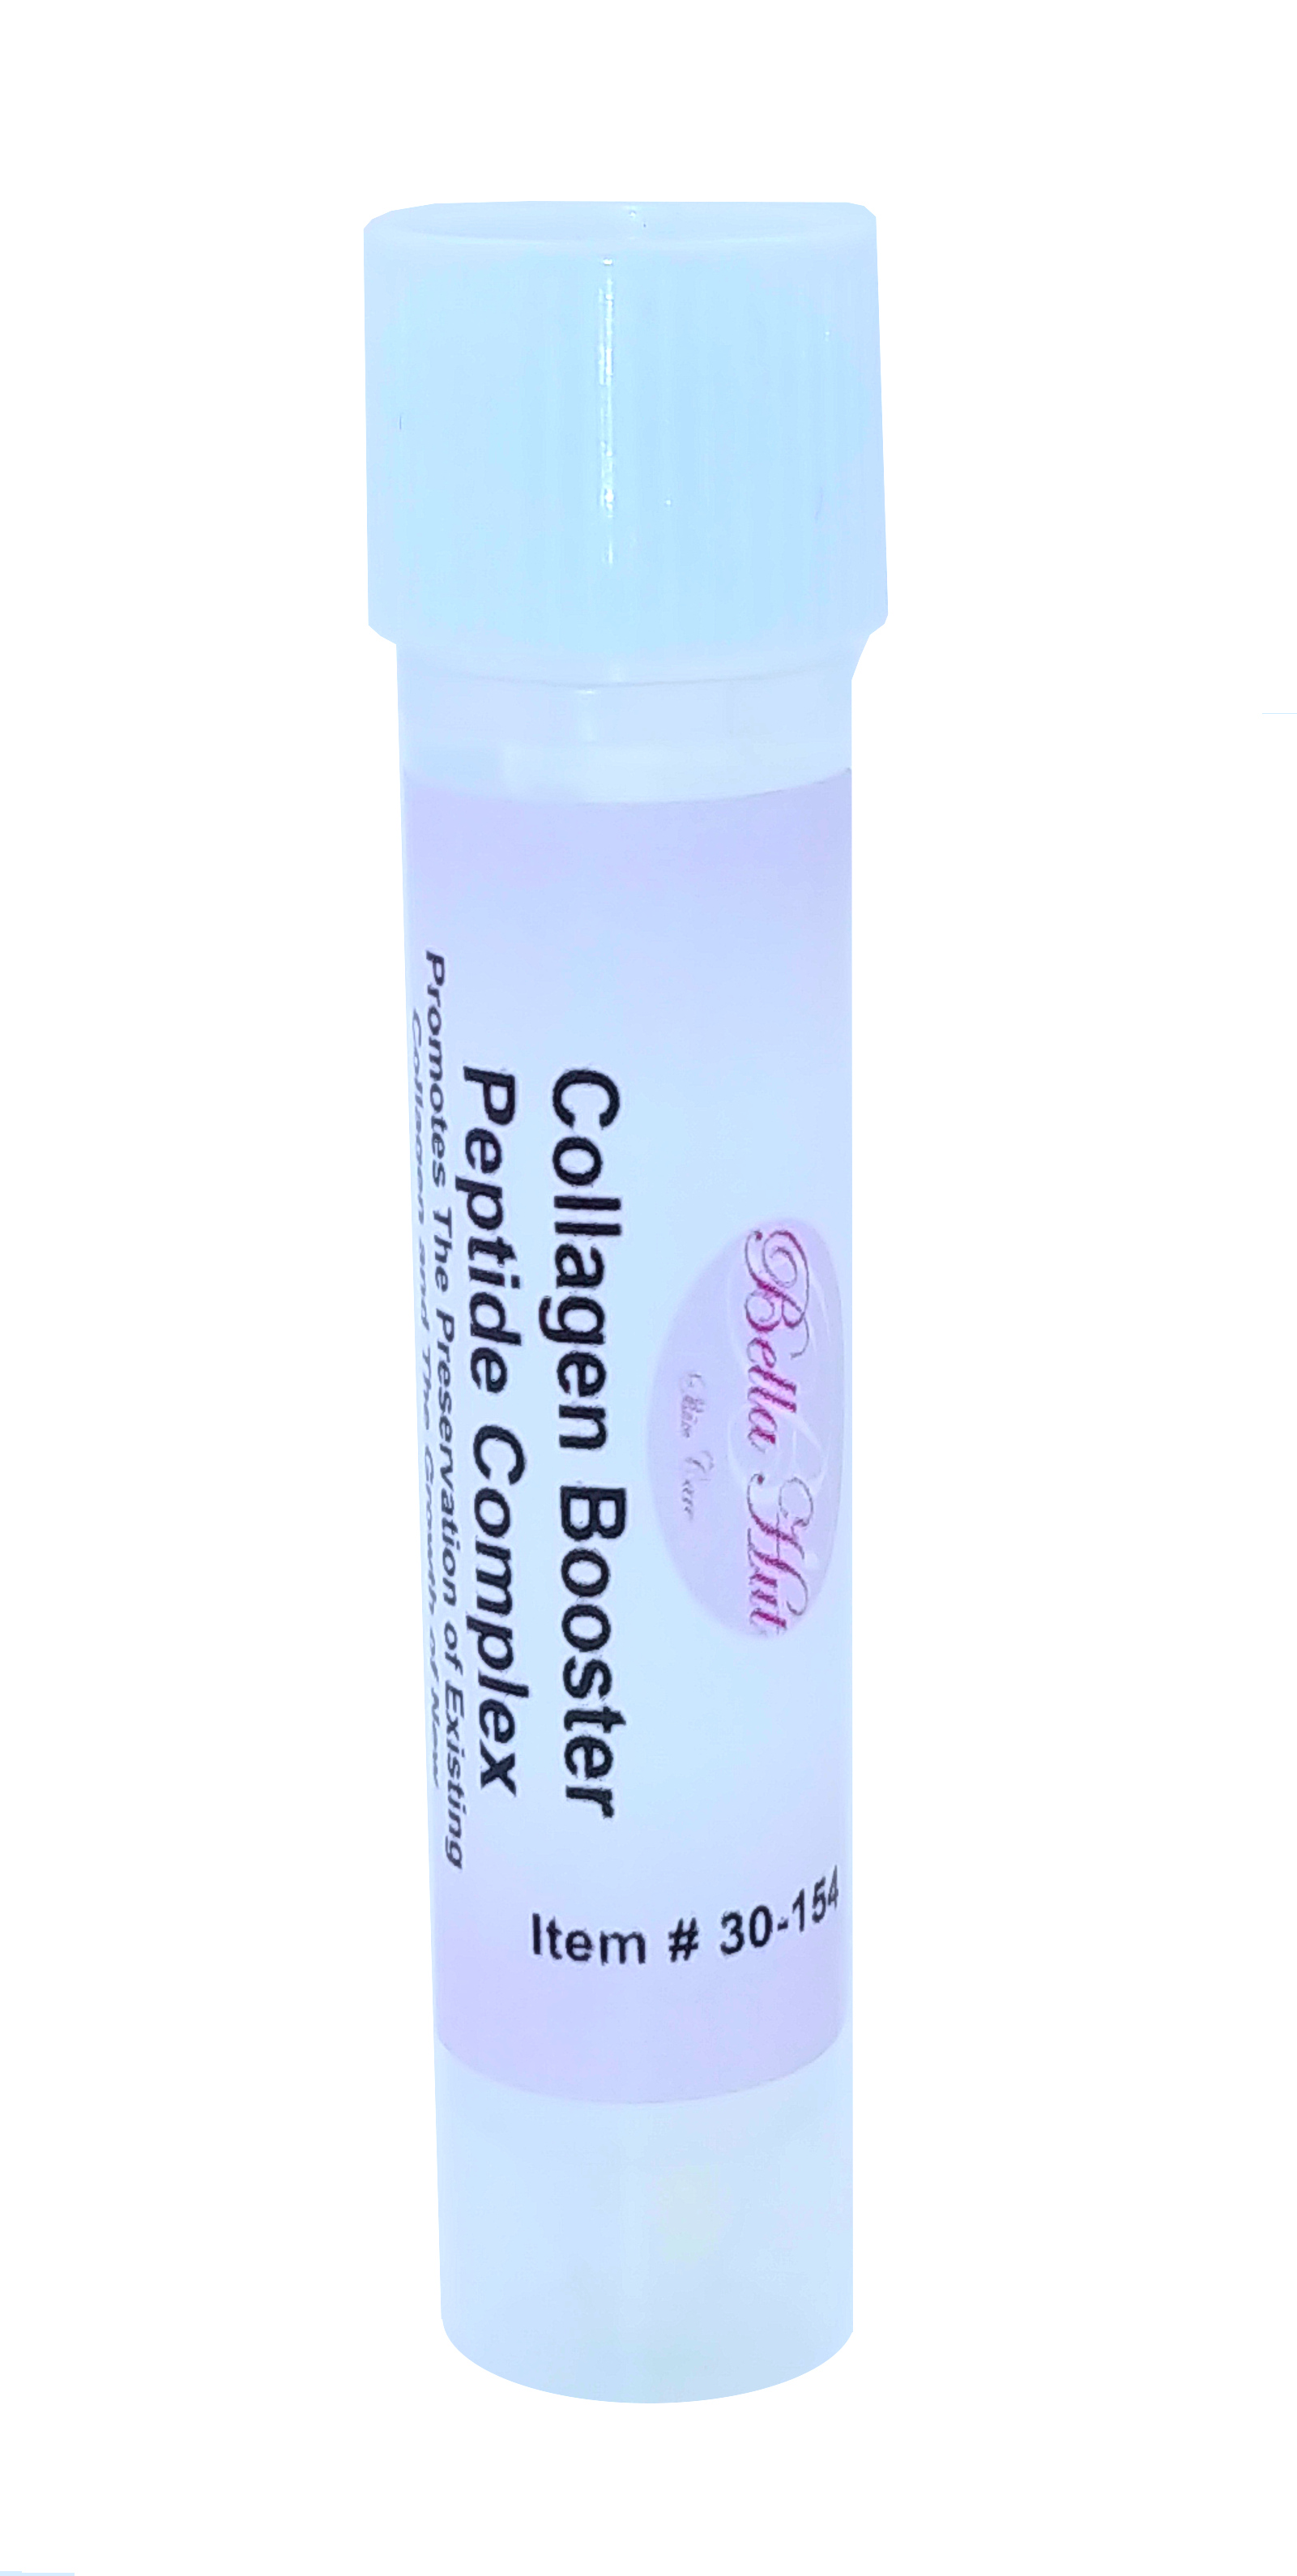 Collagen Boosting Peptide Complex to be added to a cream, serum or gel